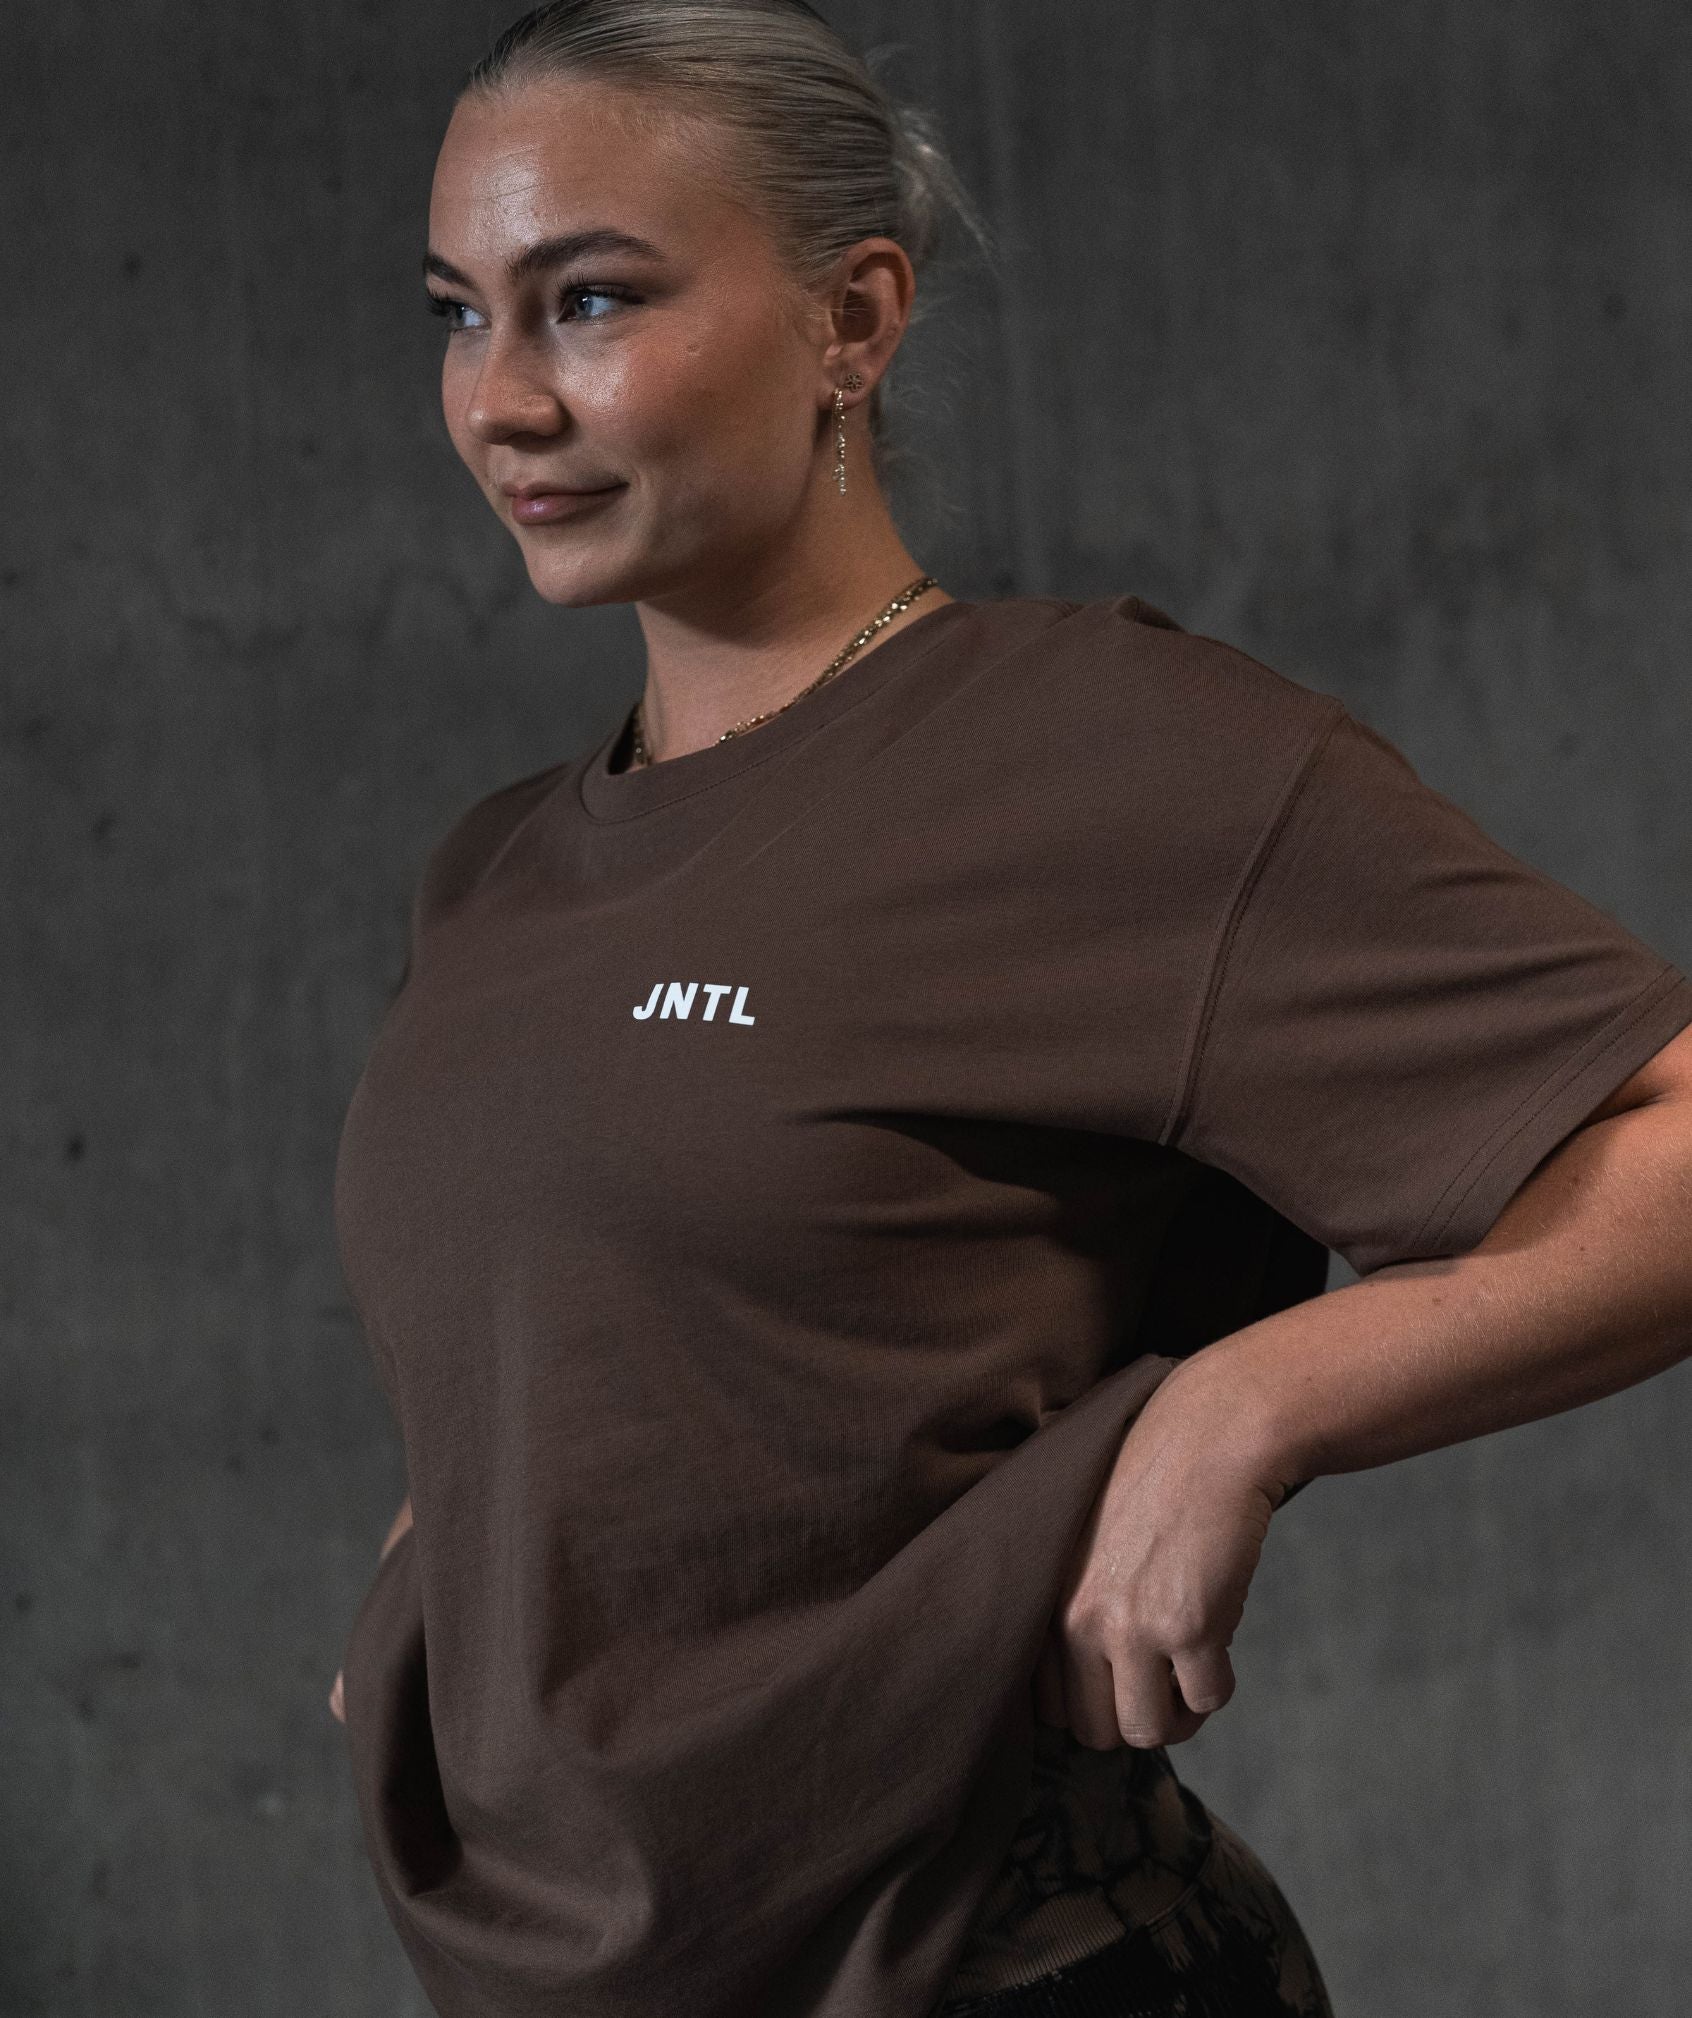 Jentle - Lifting Club Oversized T-Shirt (Brown)